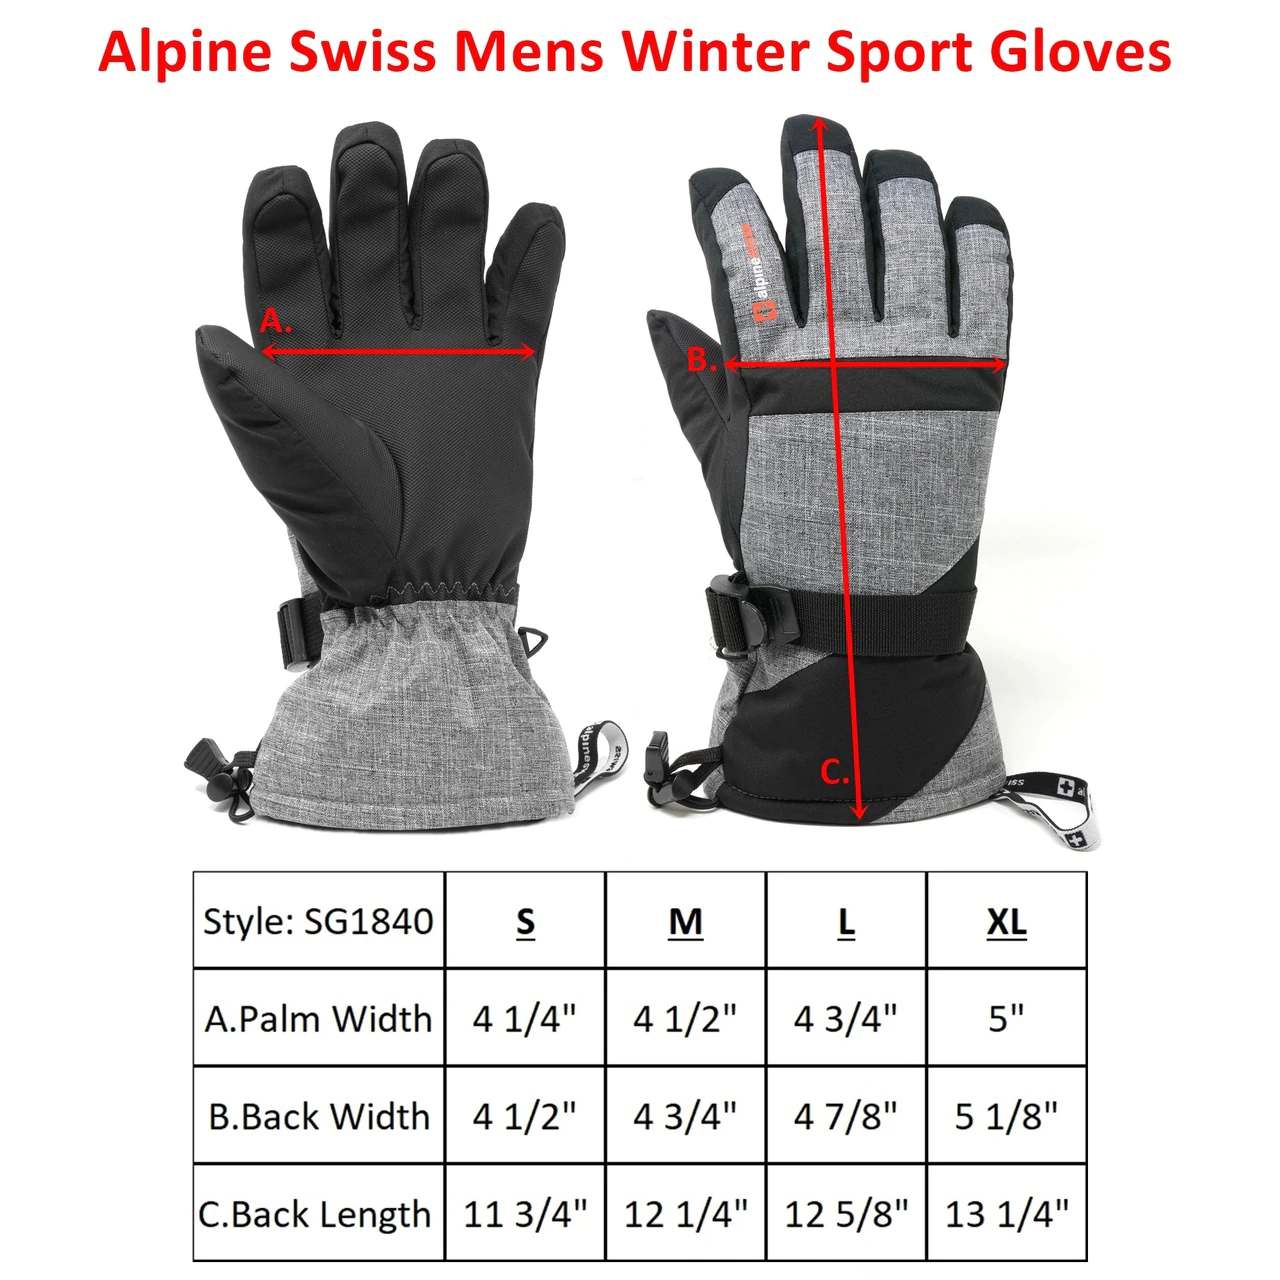 How to Measure Glove Size: Ultimate Glove Sizing Guide - Alpine Swiss